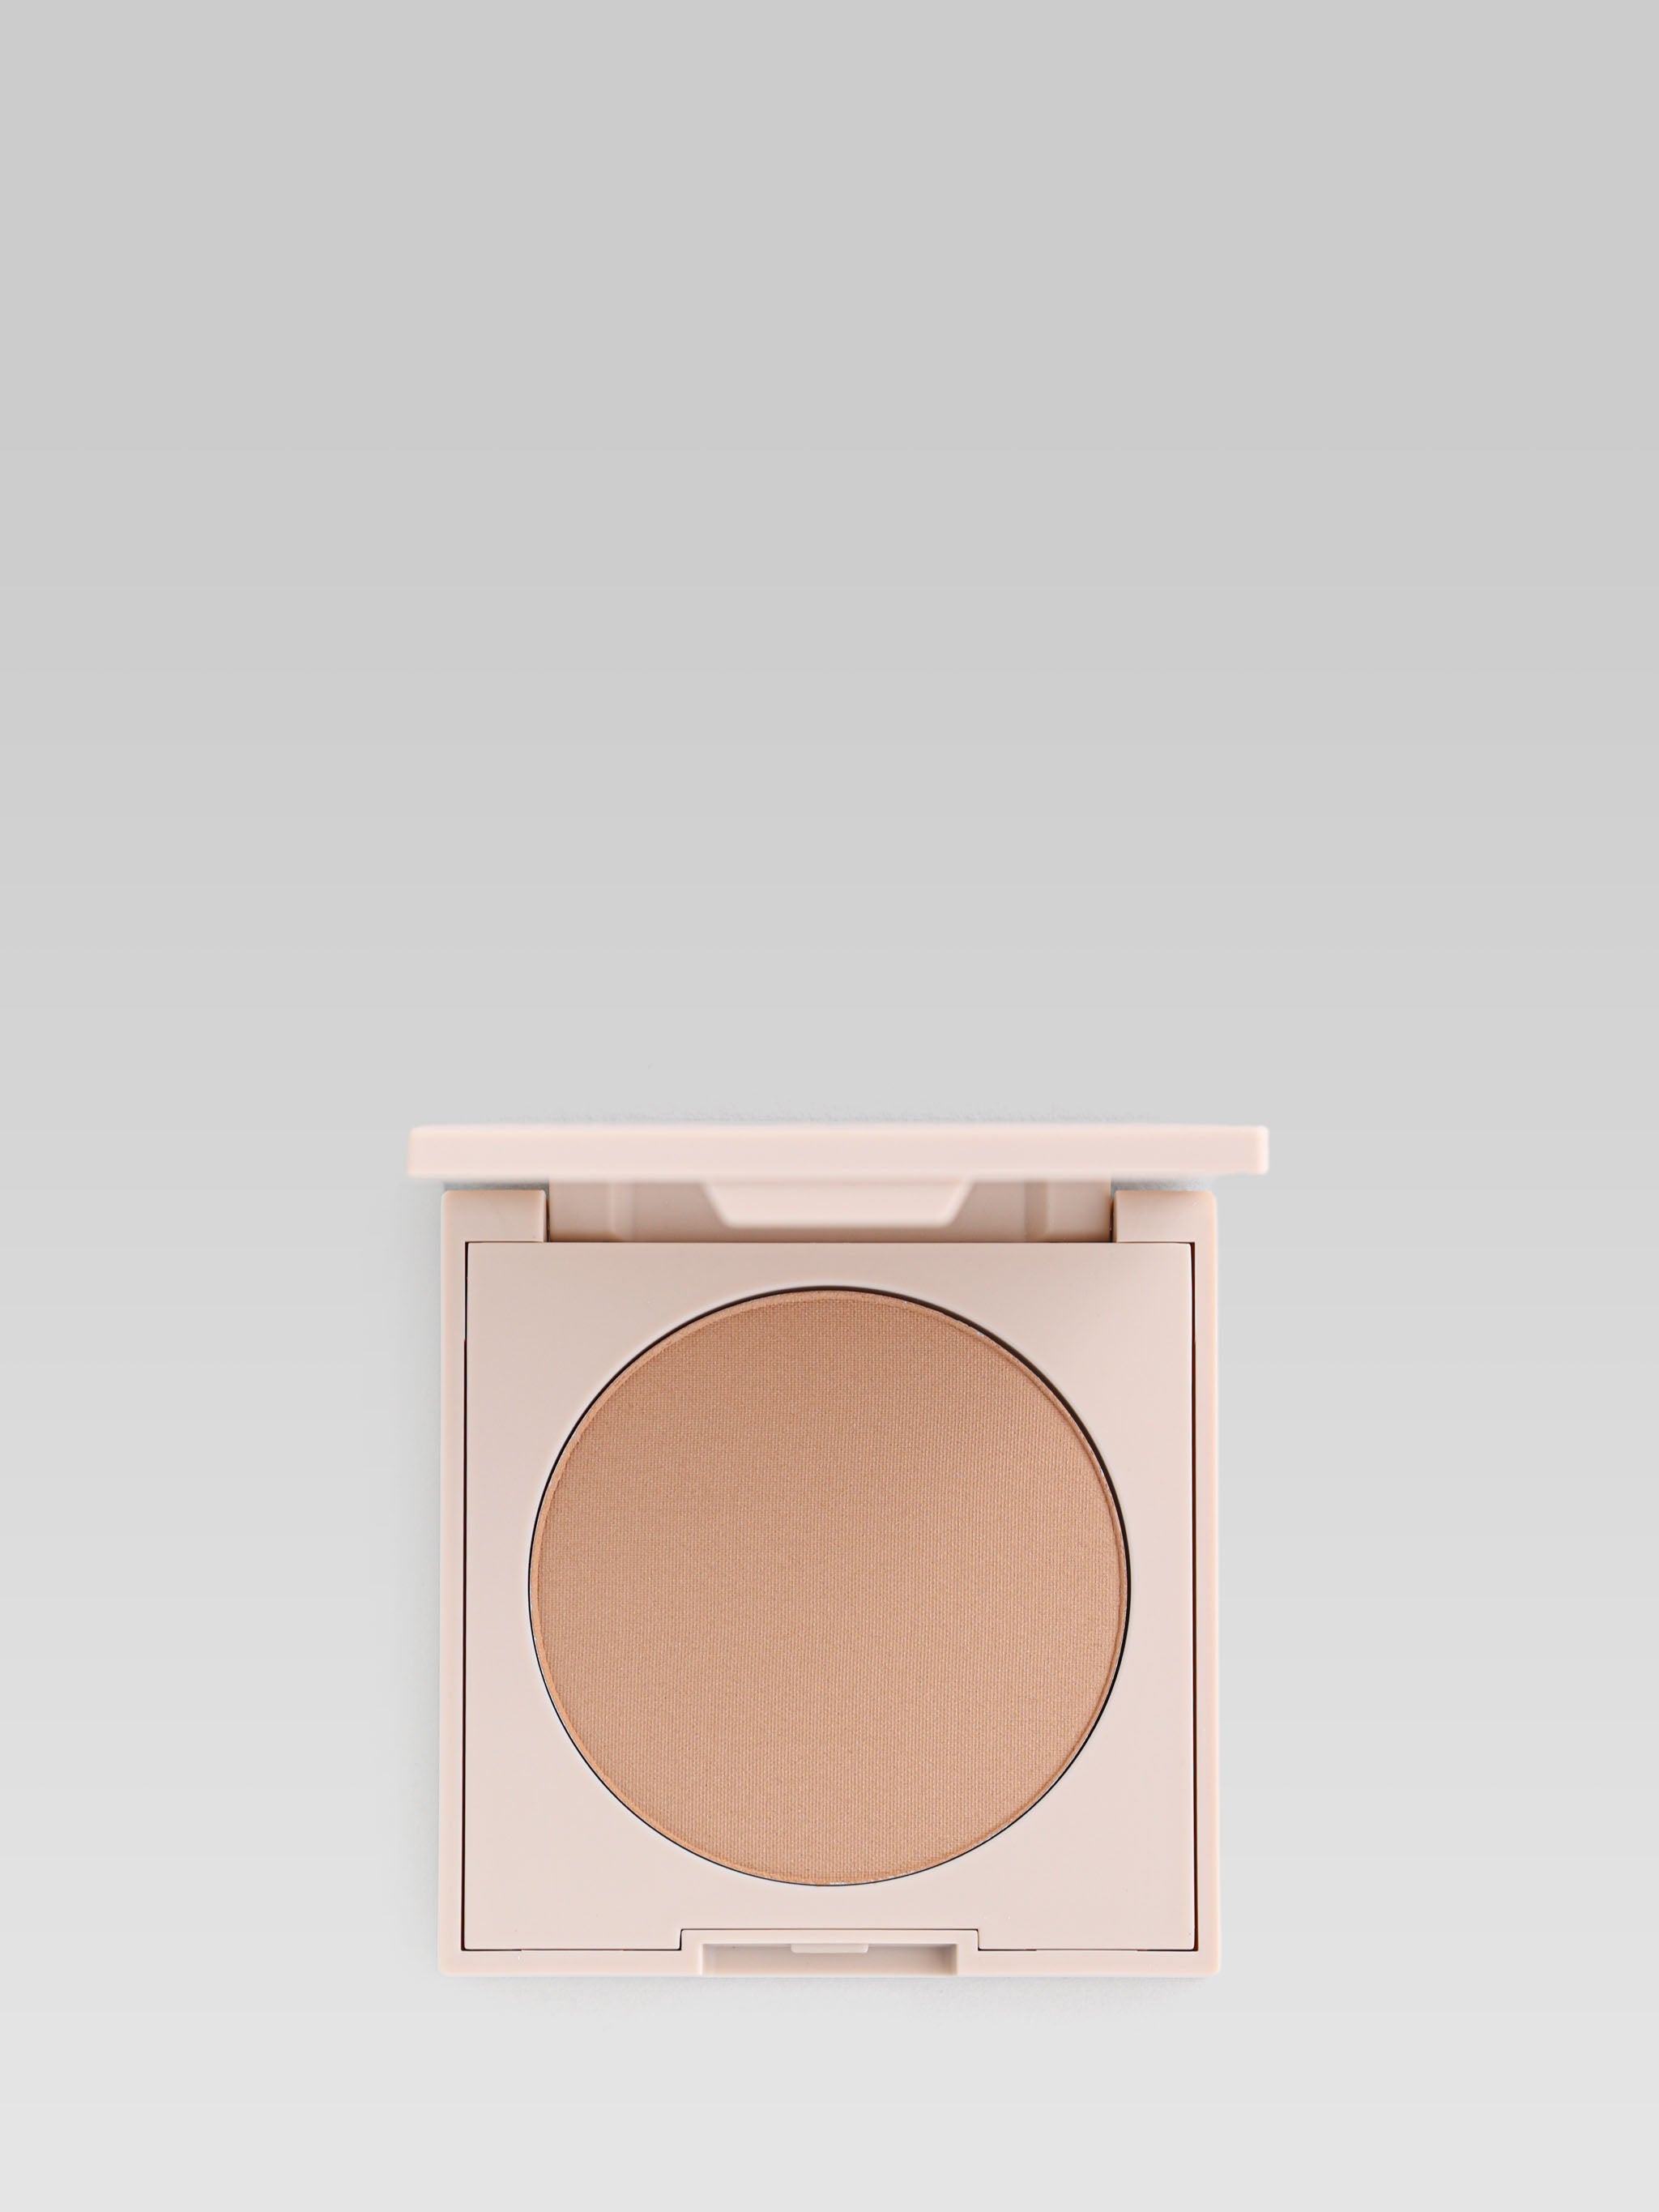 ILIA BEAUTY Night Lite Bronzing Powder in Color Drawn-In product shot